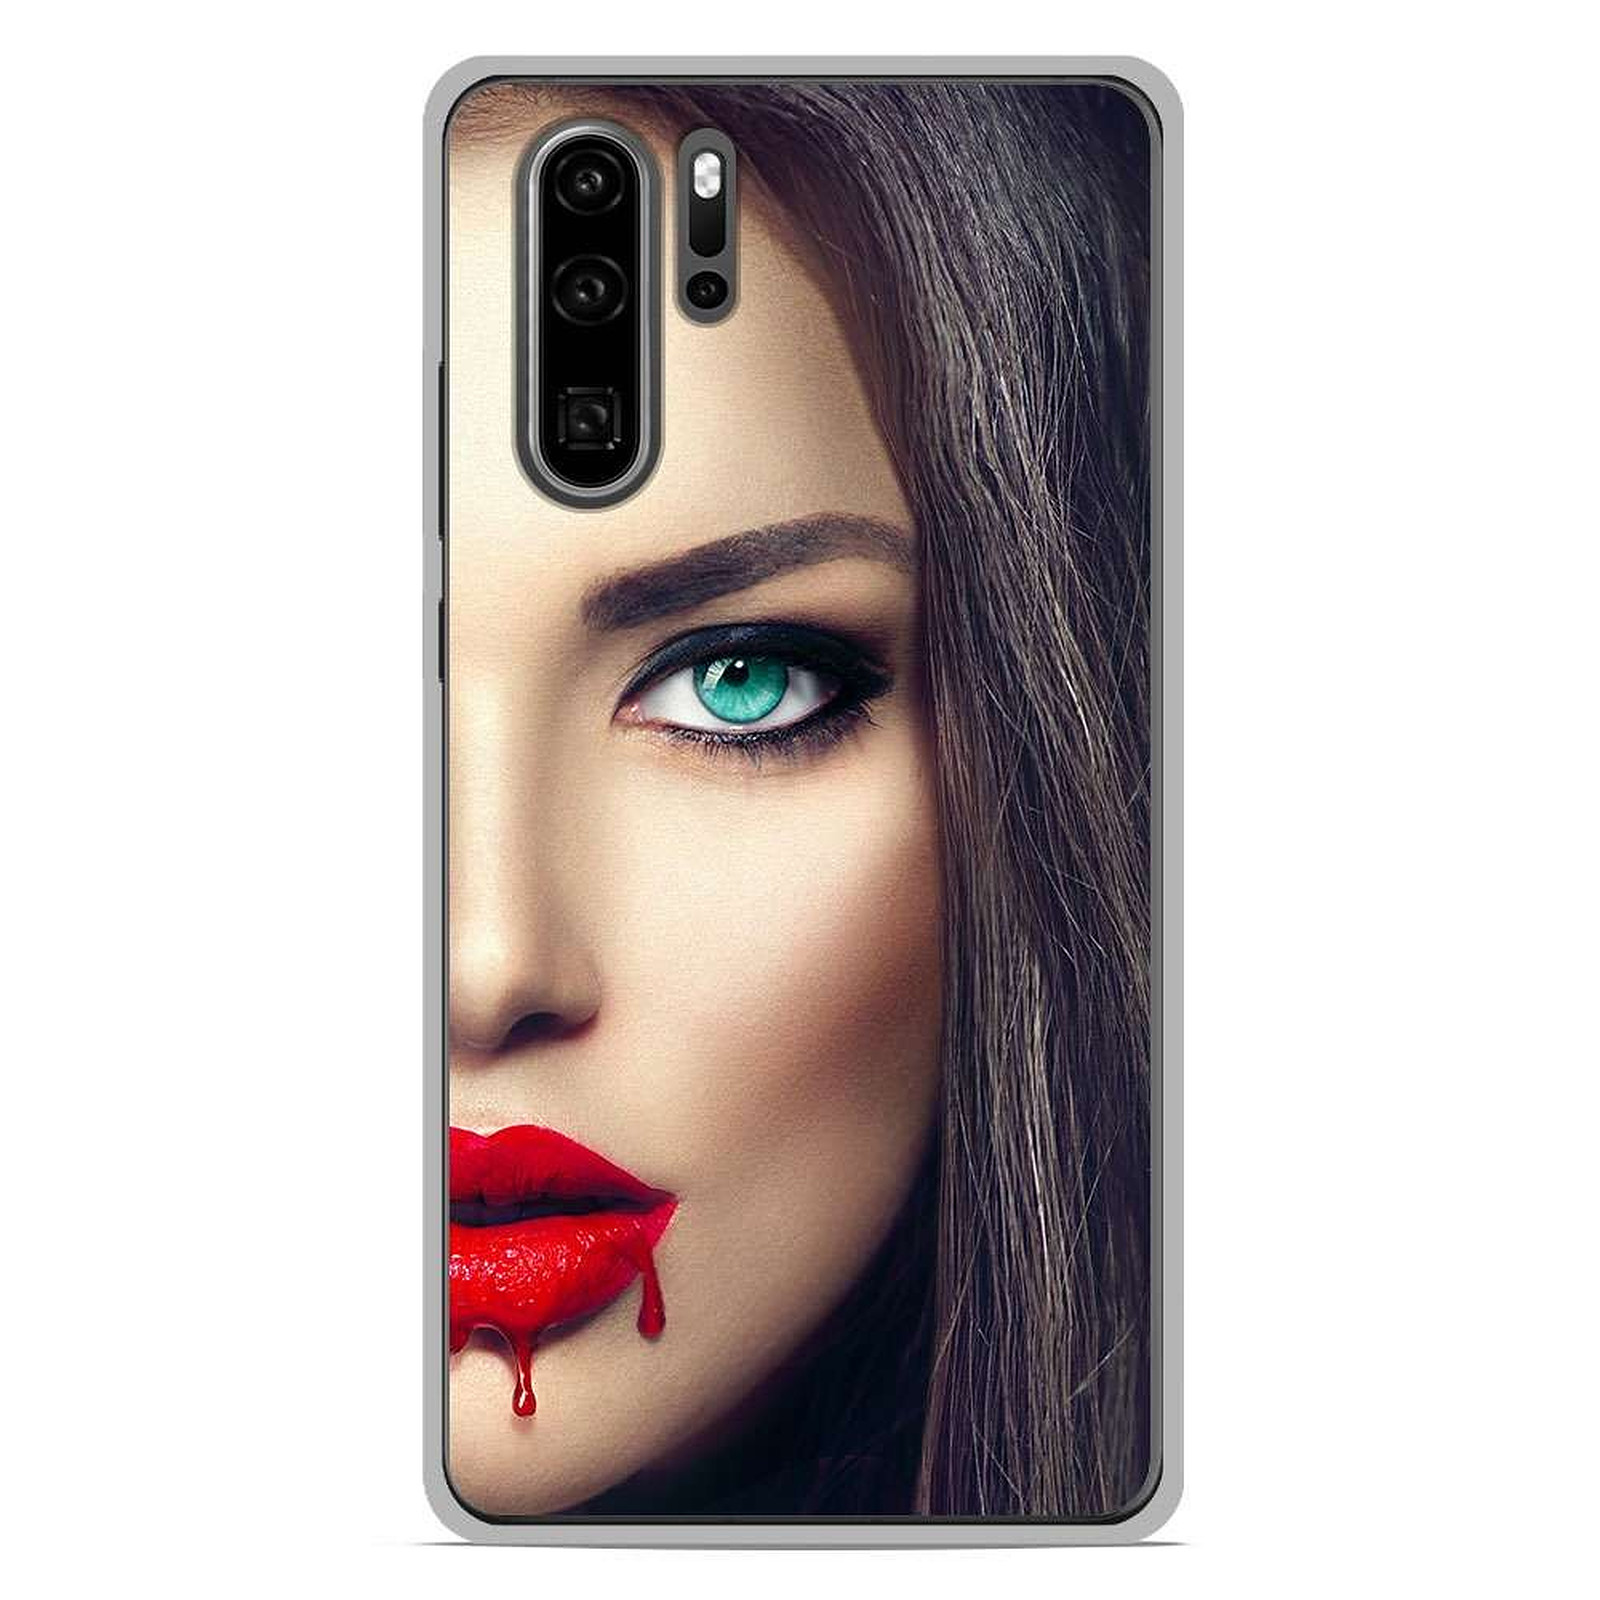 1001 Coques Coque silicone gel Huawei P30 Pro motif Lèvres Sang - Coque telephone 1001Coques